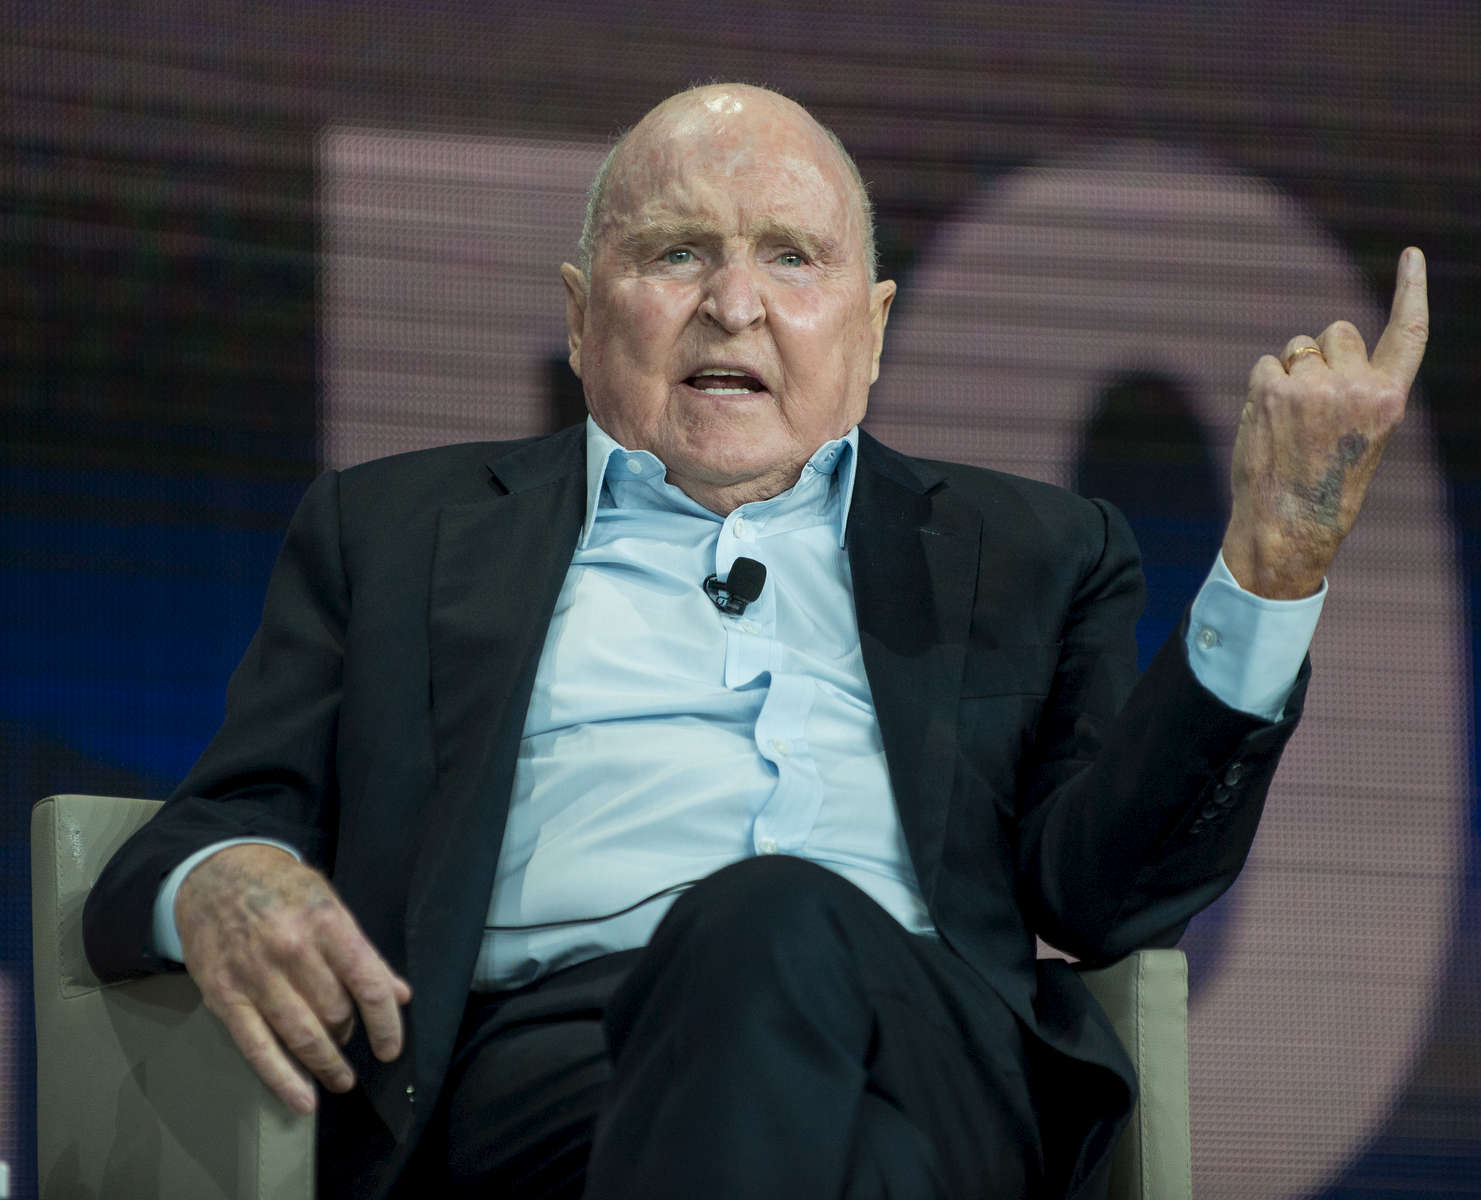 Jack Welch is speaking at the Synergy Global Forum NY at The Theater at Madison Square Garden October 28, 2017. Photo by Ron Wyatt Photography